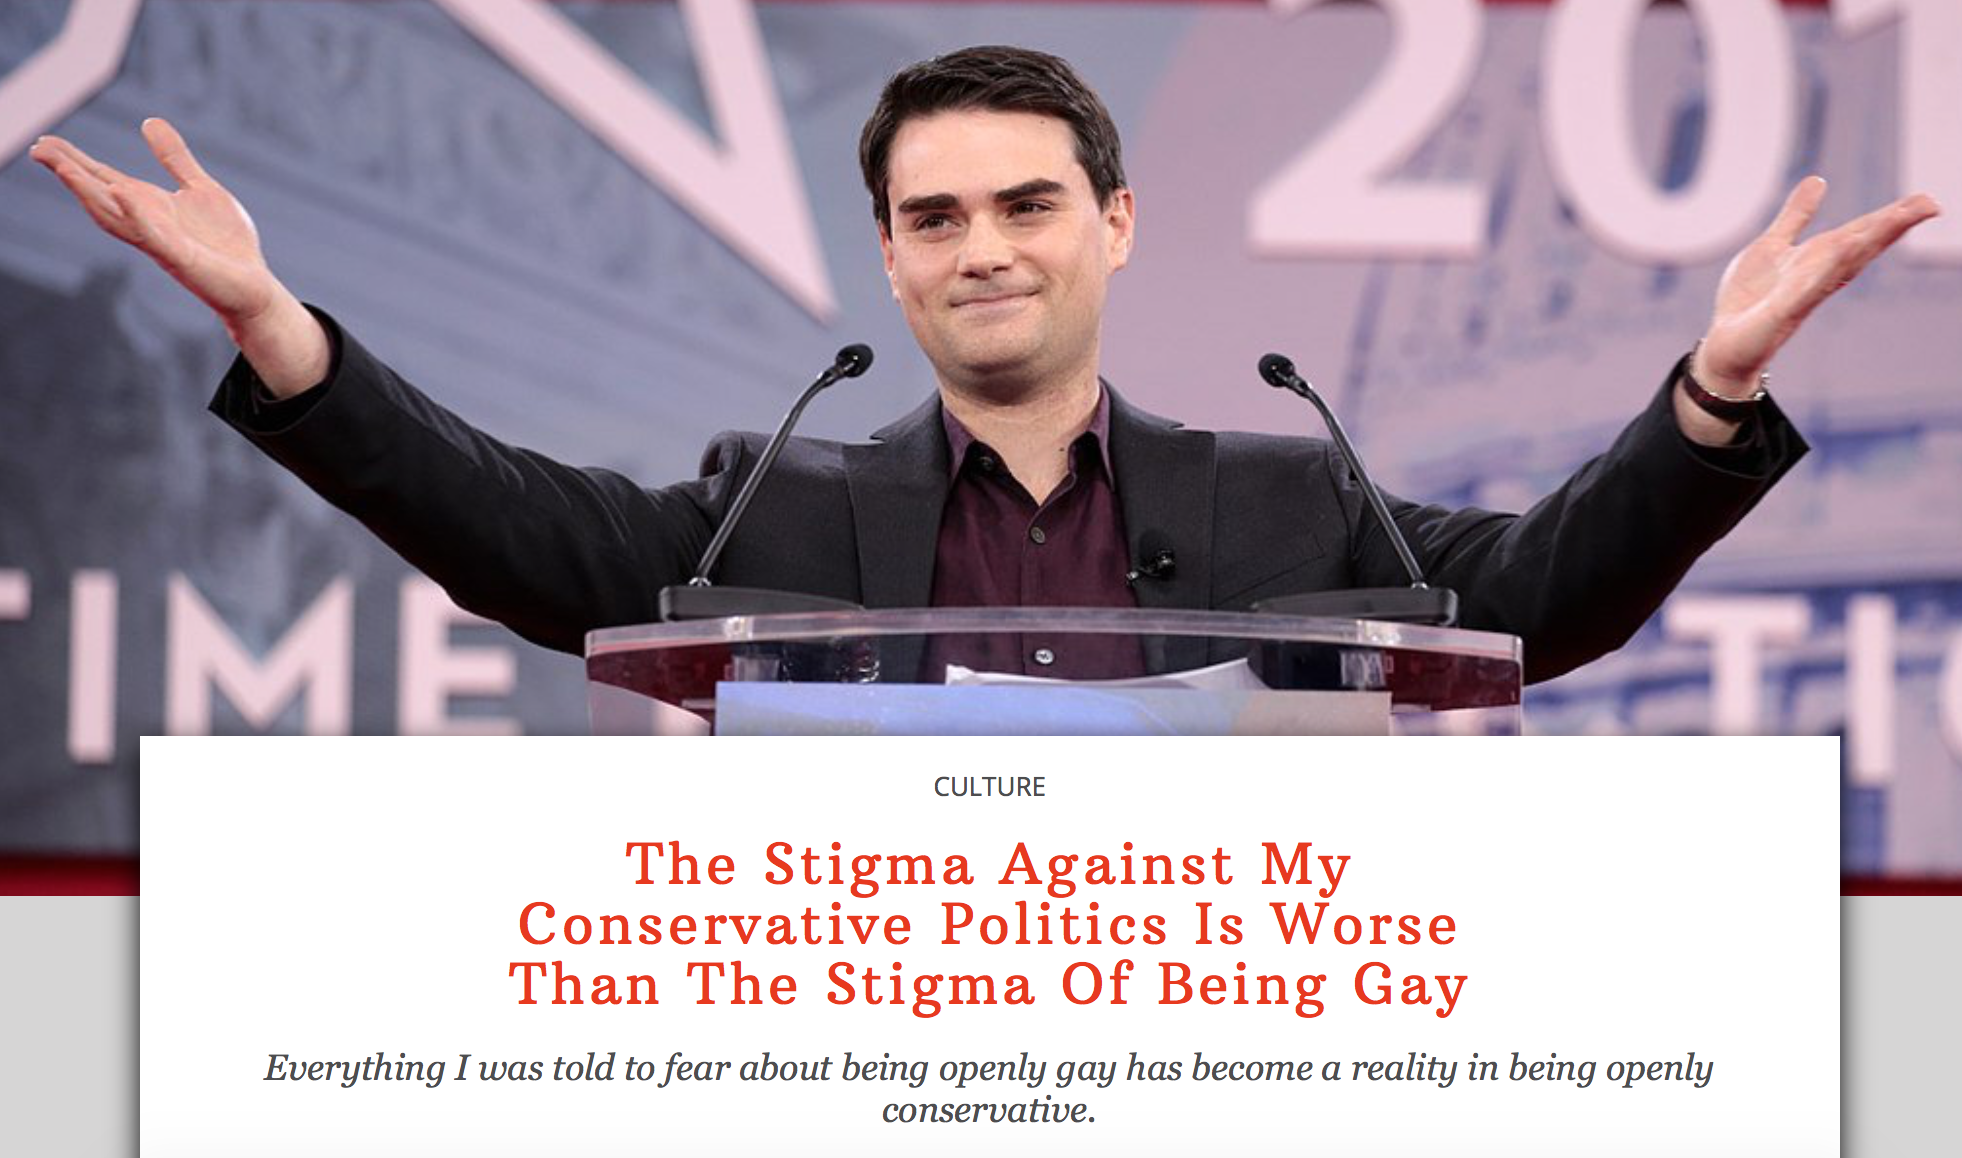 Being Conservative Brings More Stigma Than Being Gay